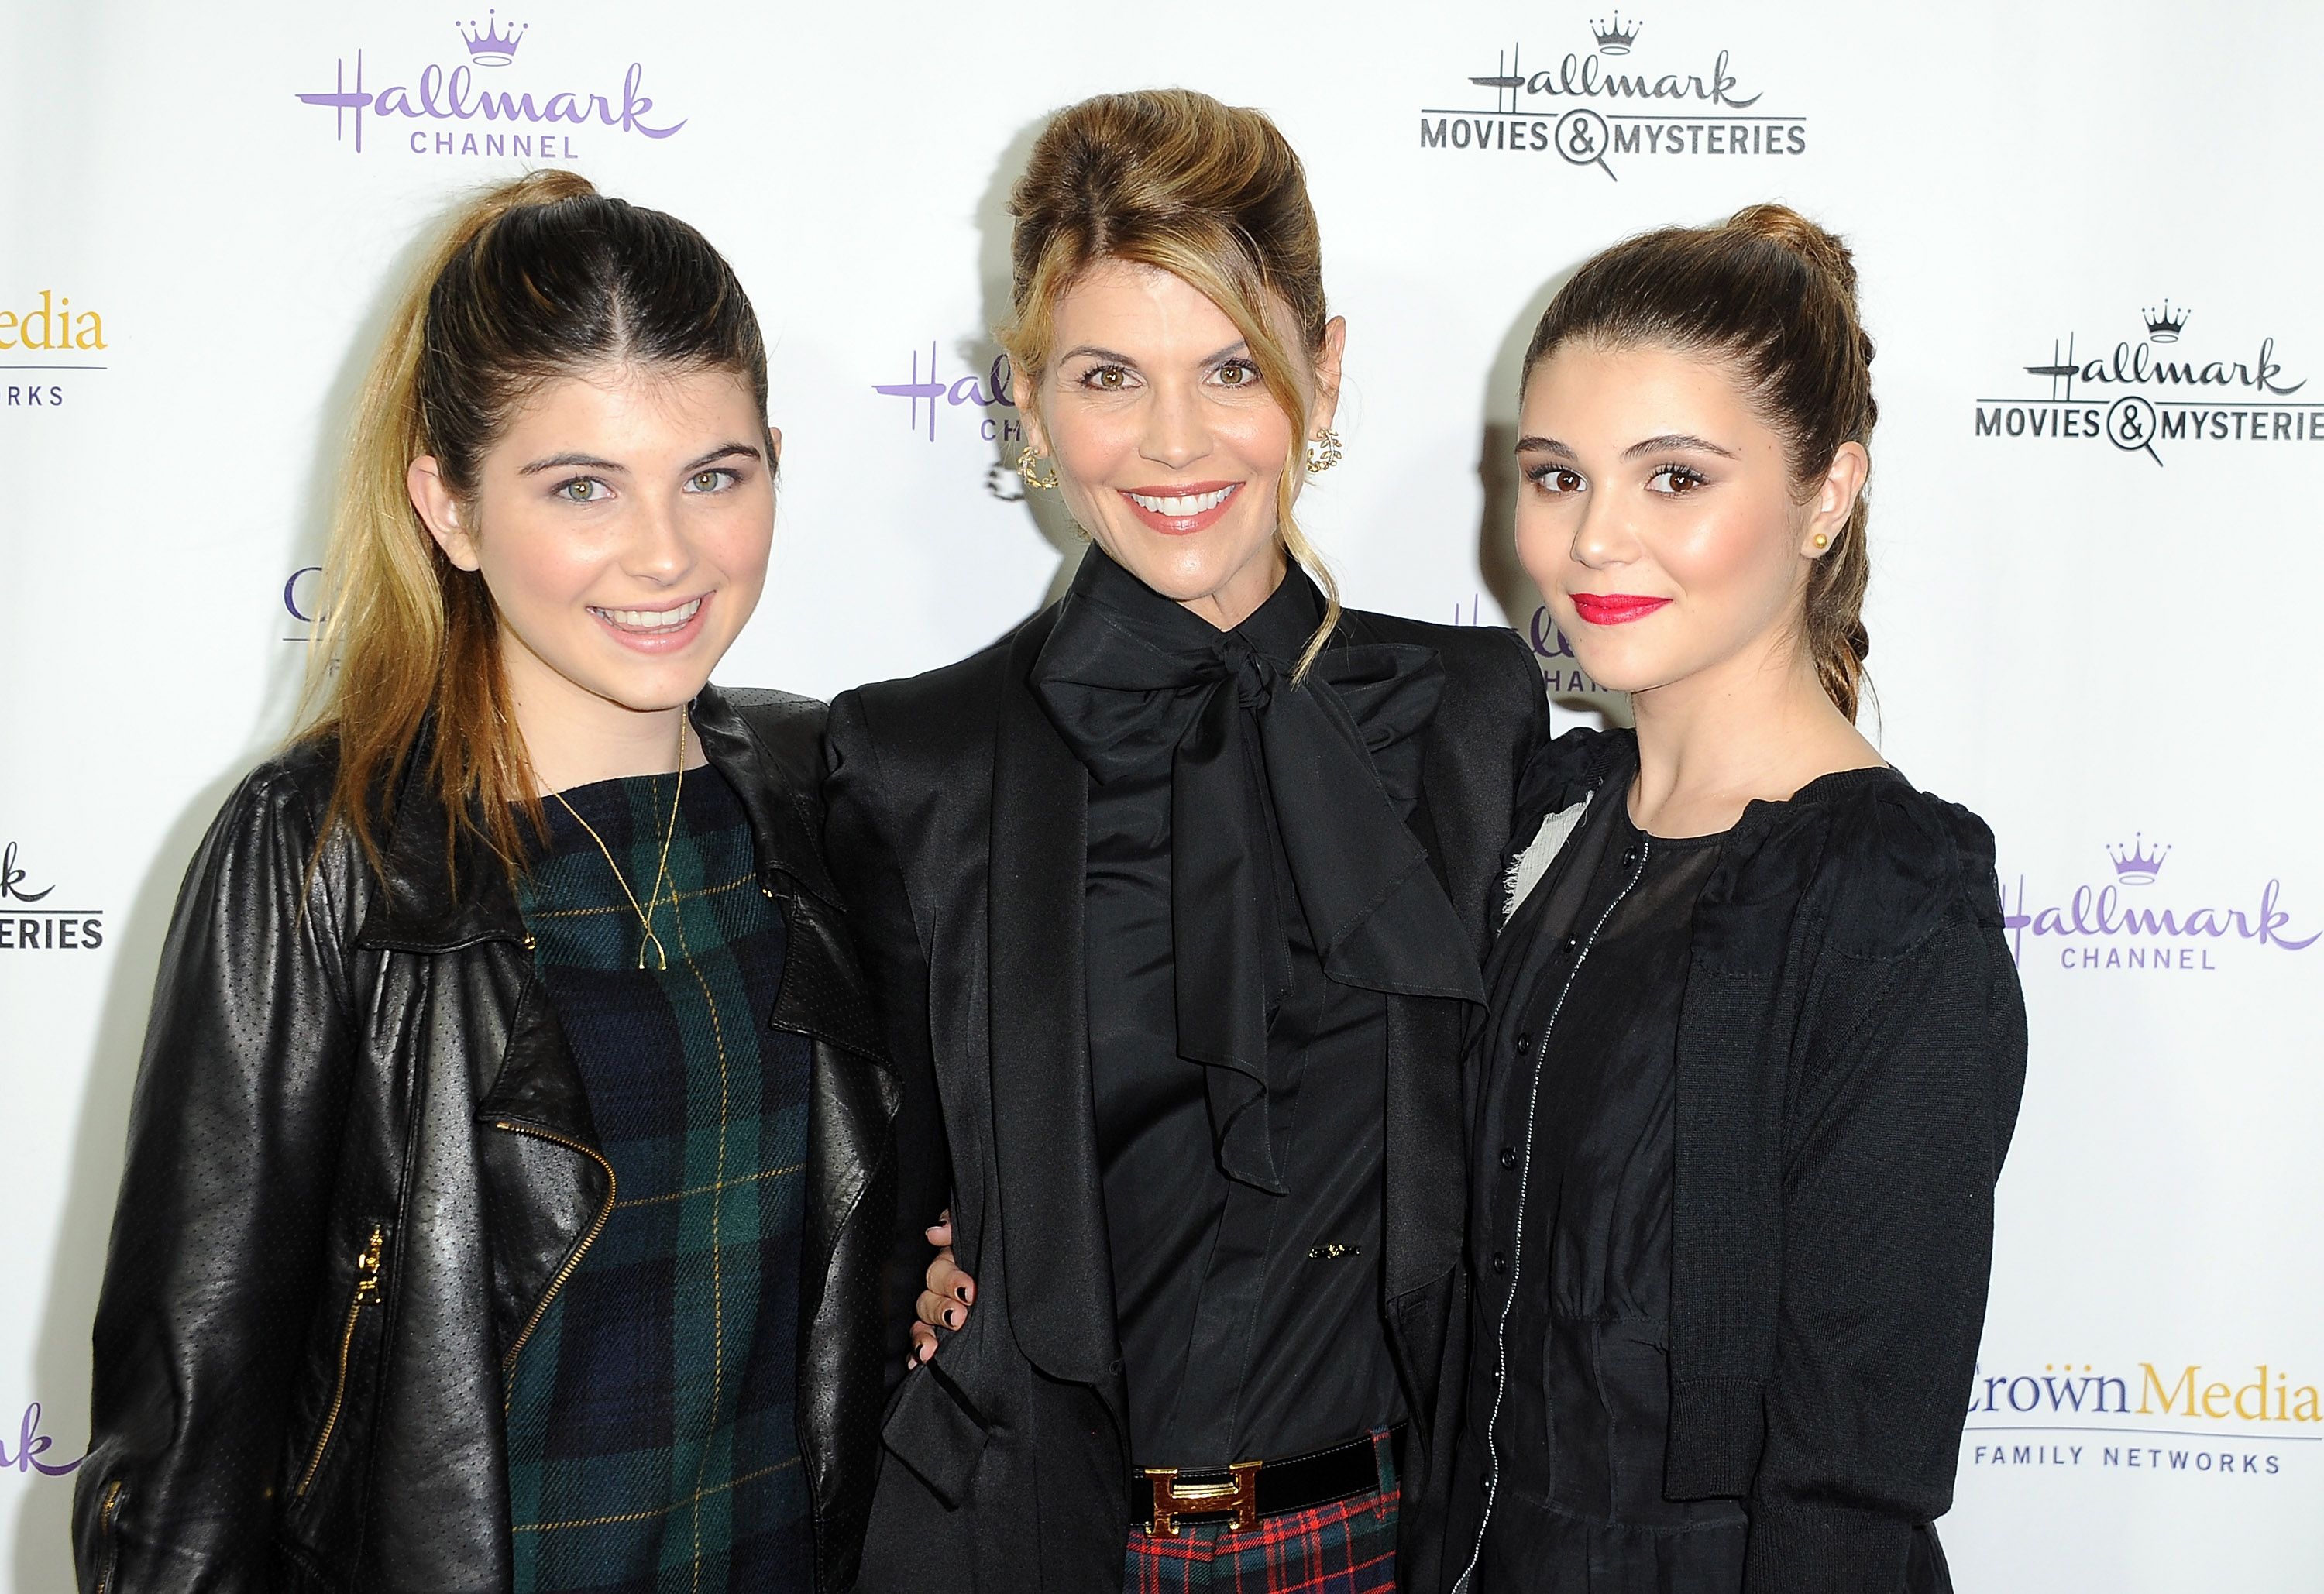  Lori Loughlin and her daughters Isabella and Olivia Jade Giannulli at the premiere of "Northpole" in 2014 in Los Angeles | Source: Getty Images